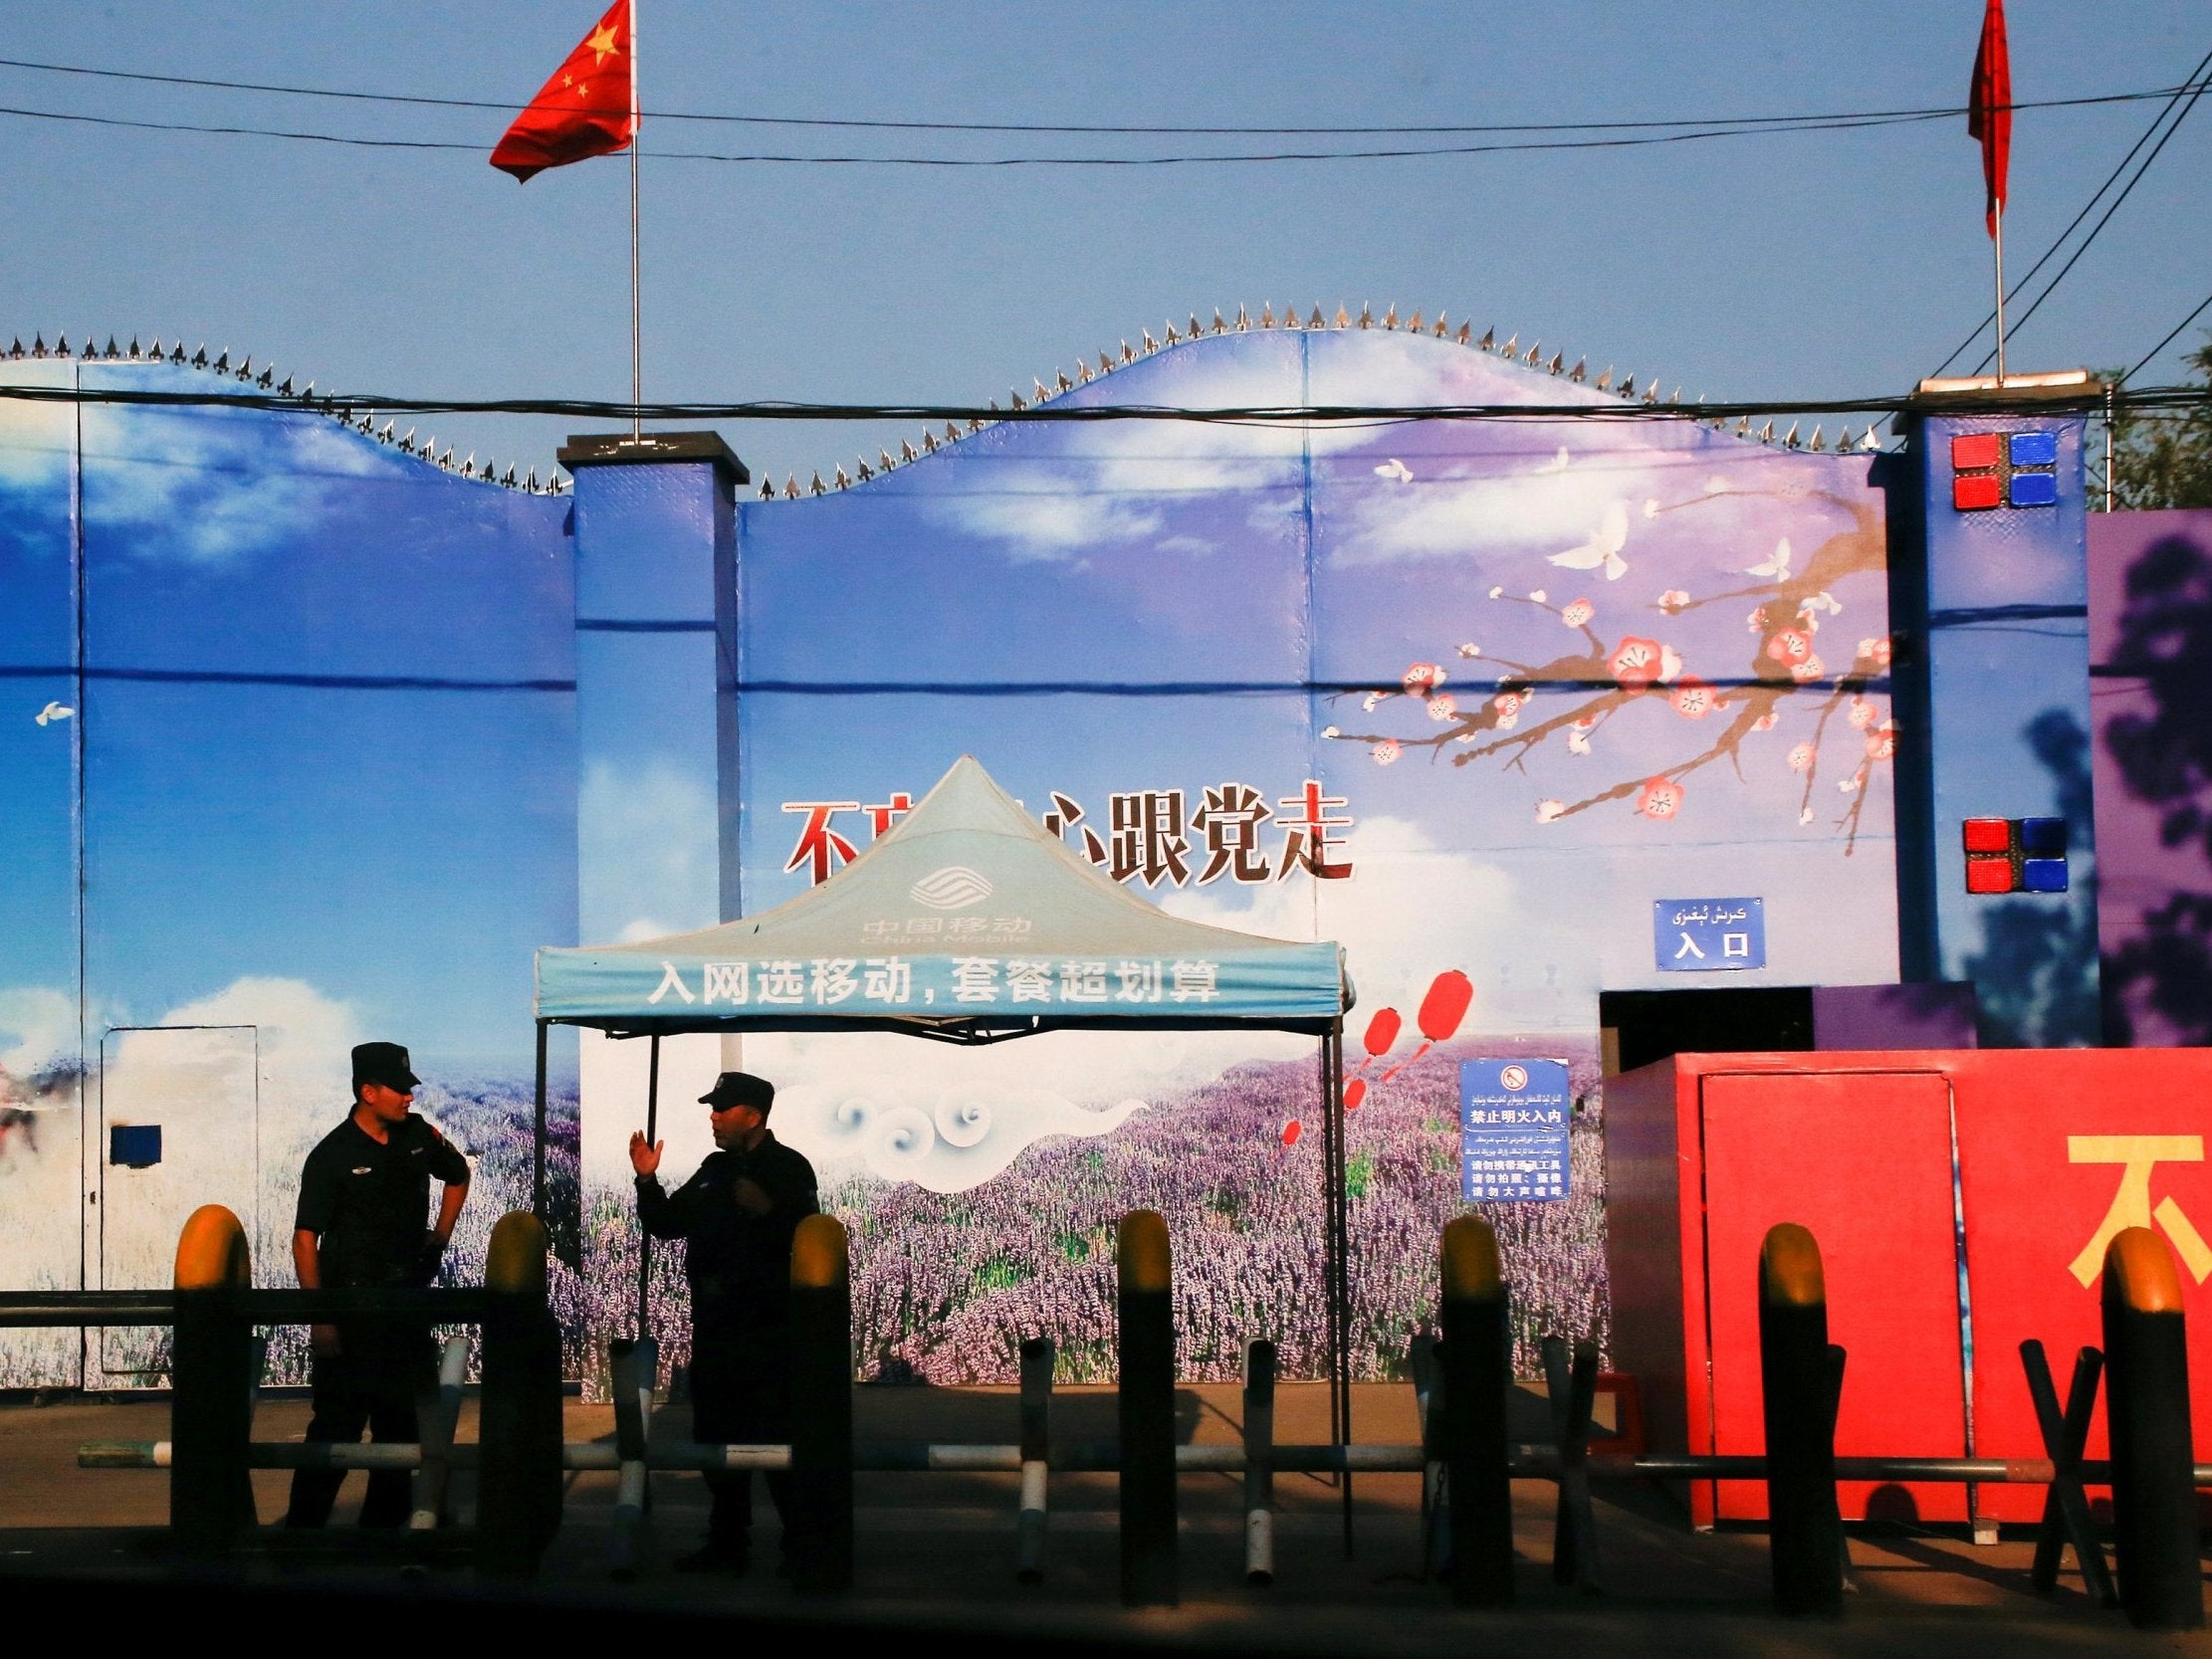 Security guards stand at the gates of an Uighur detainment camp in Xinjiang